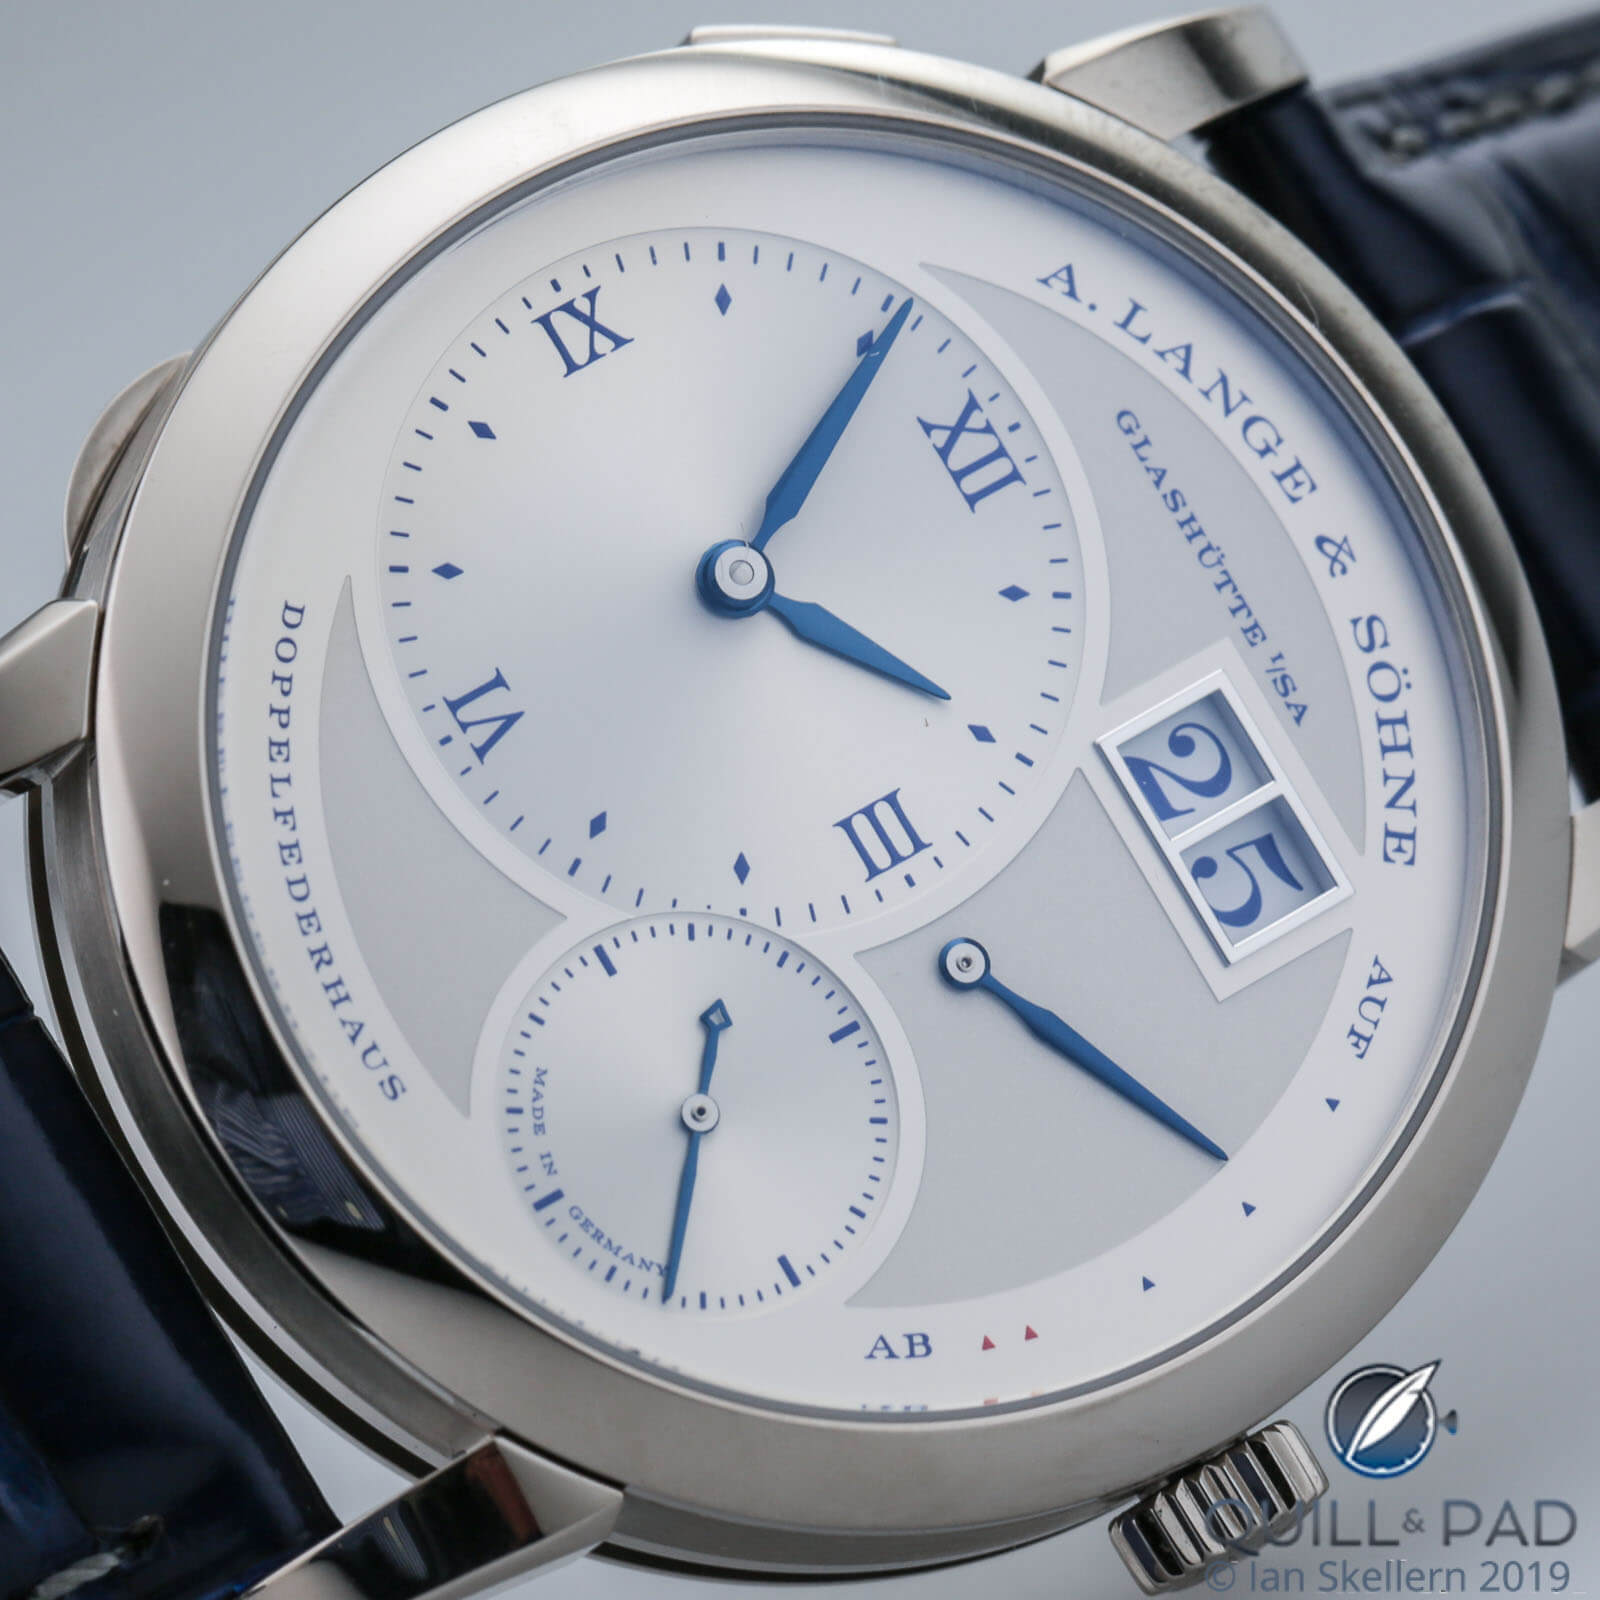 Dial of the A. Lange & Söhne Lange 1 25th Anniversary Edition